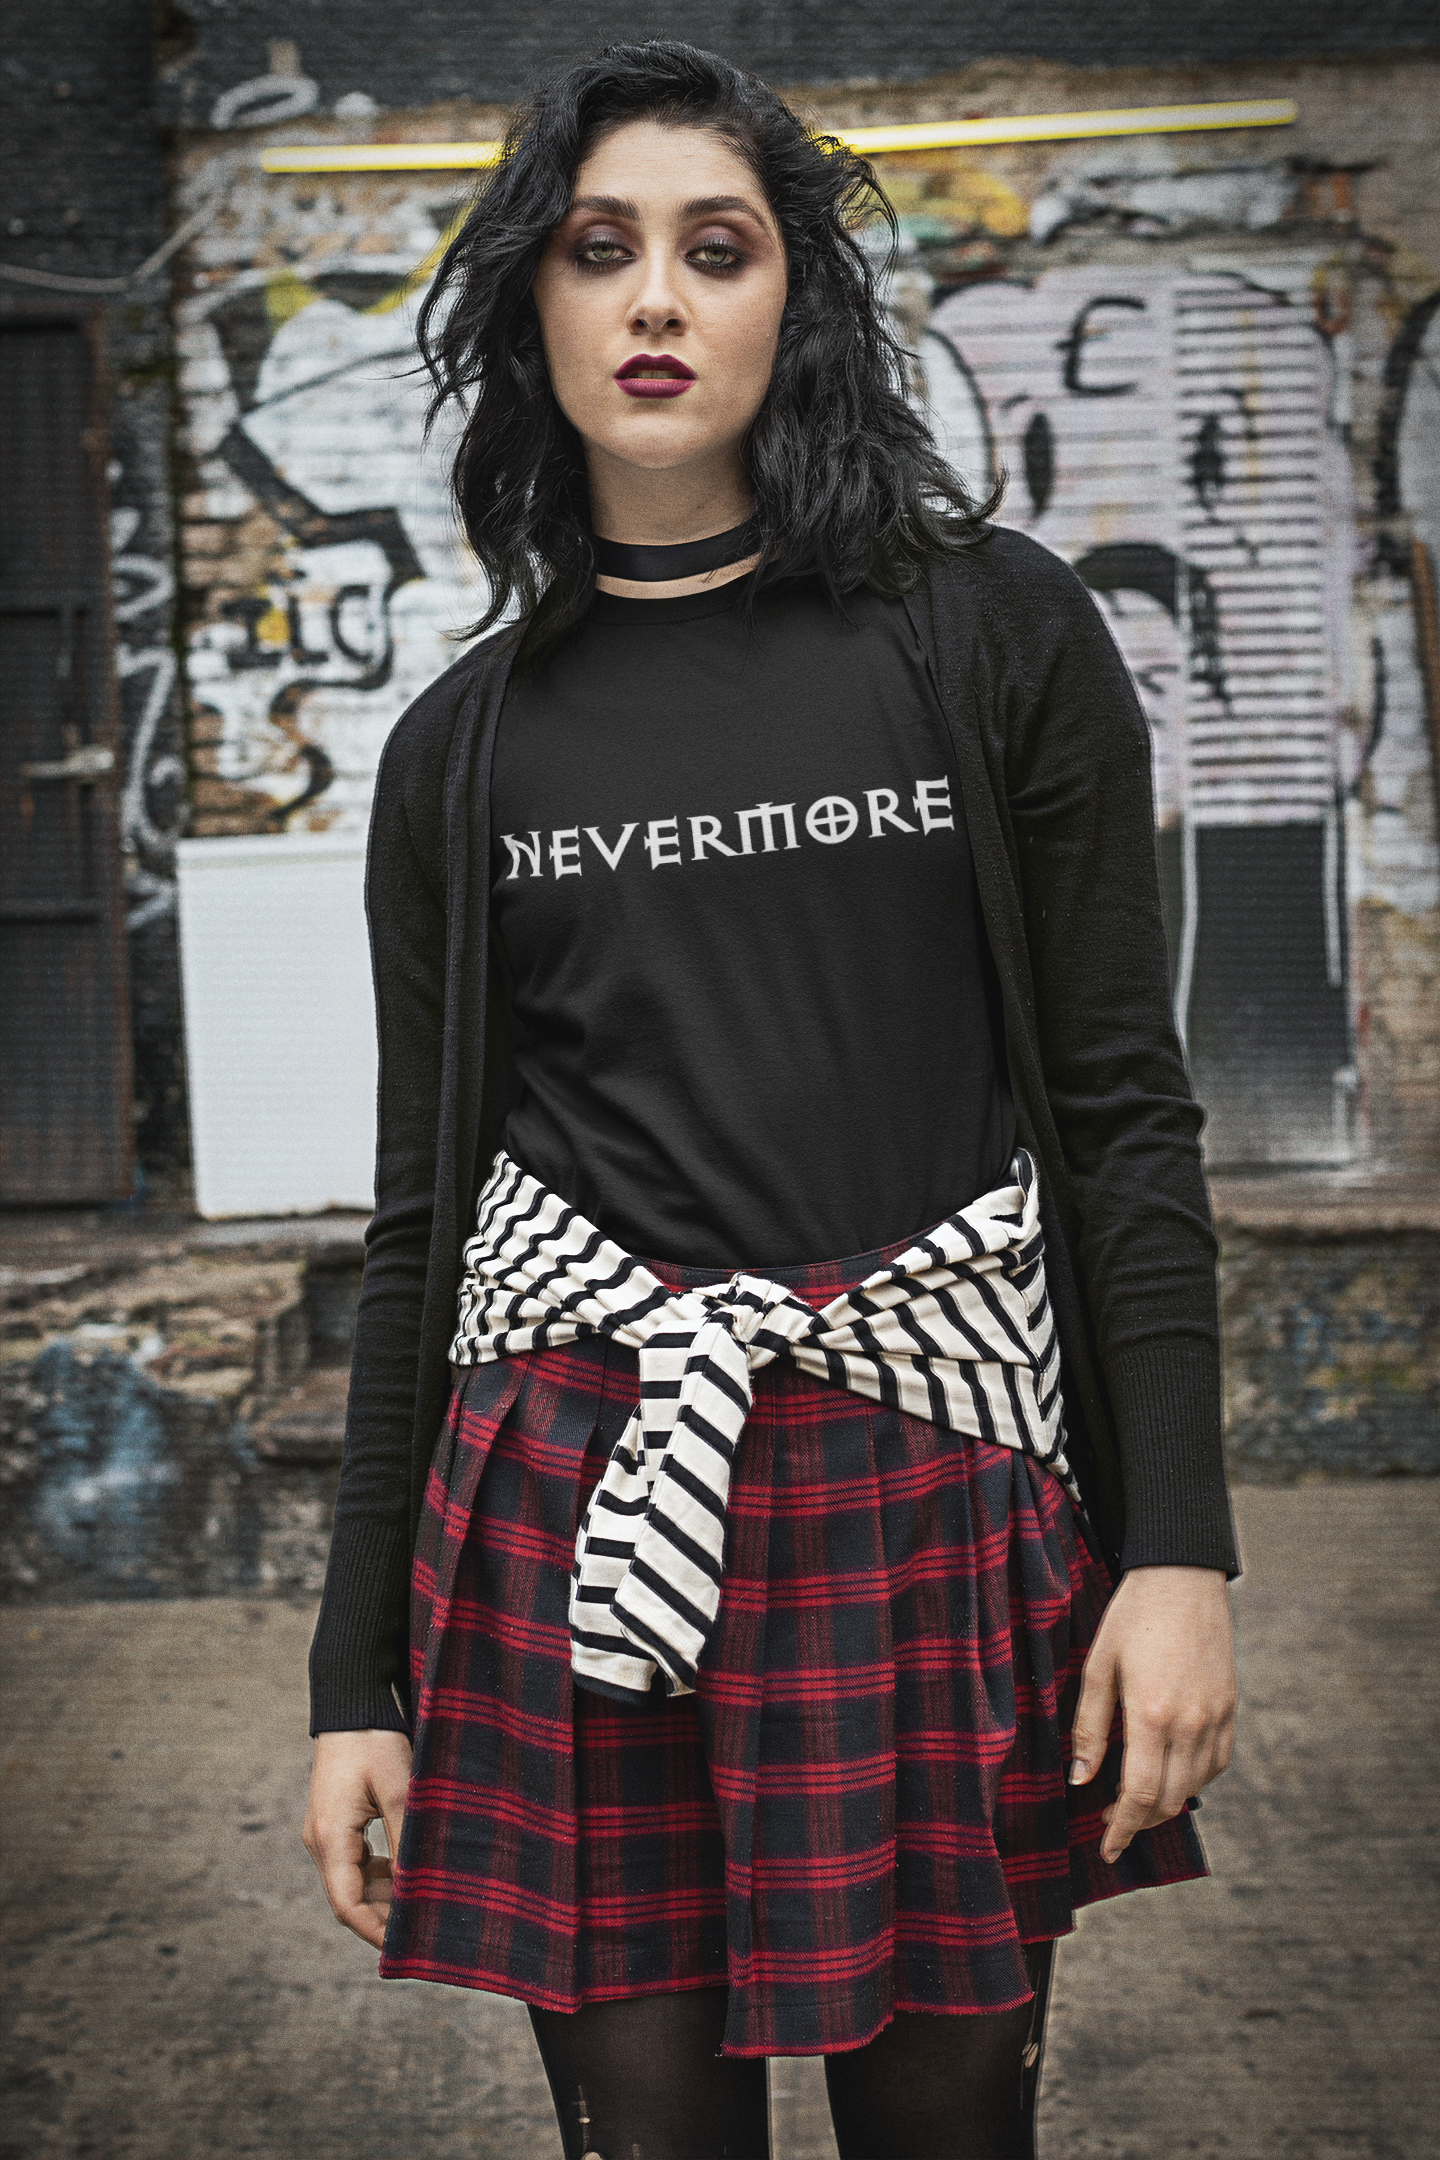 Goth girl in Nevermore tee